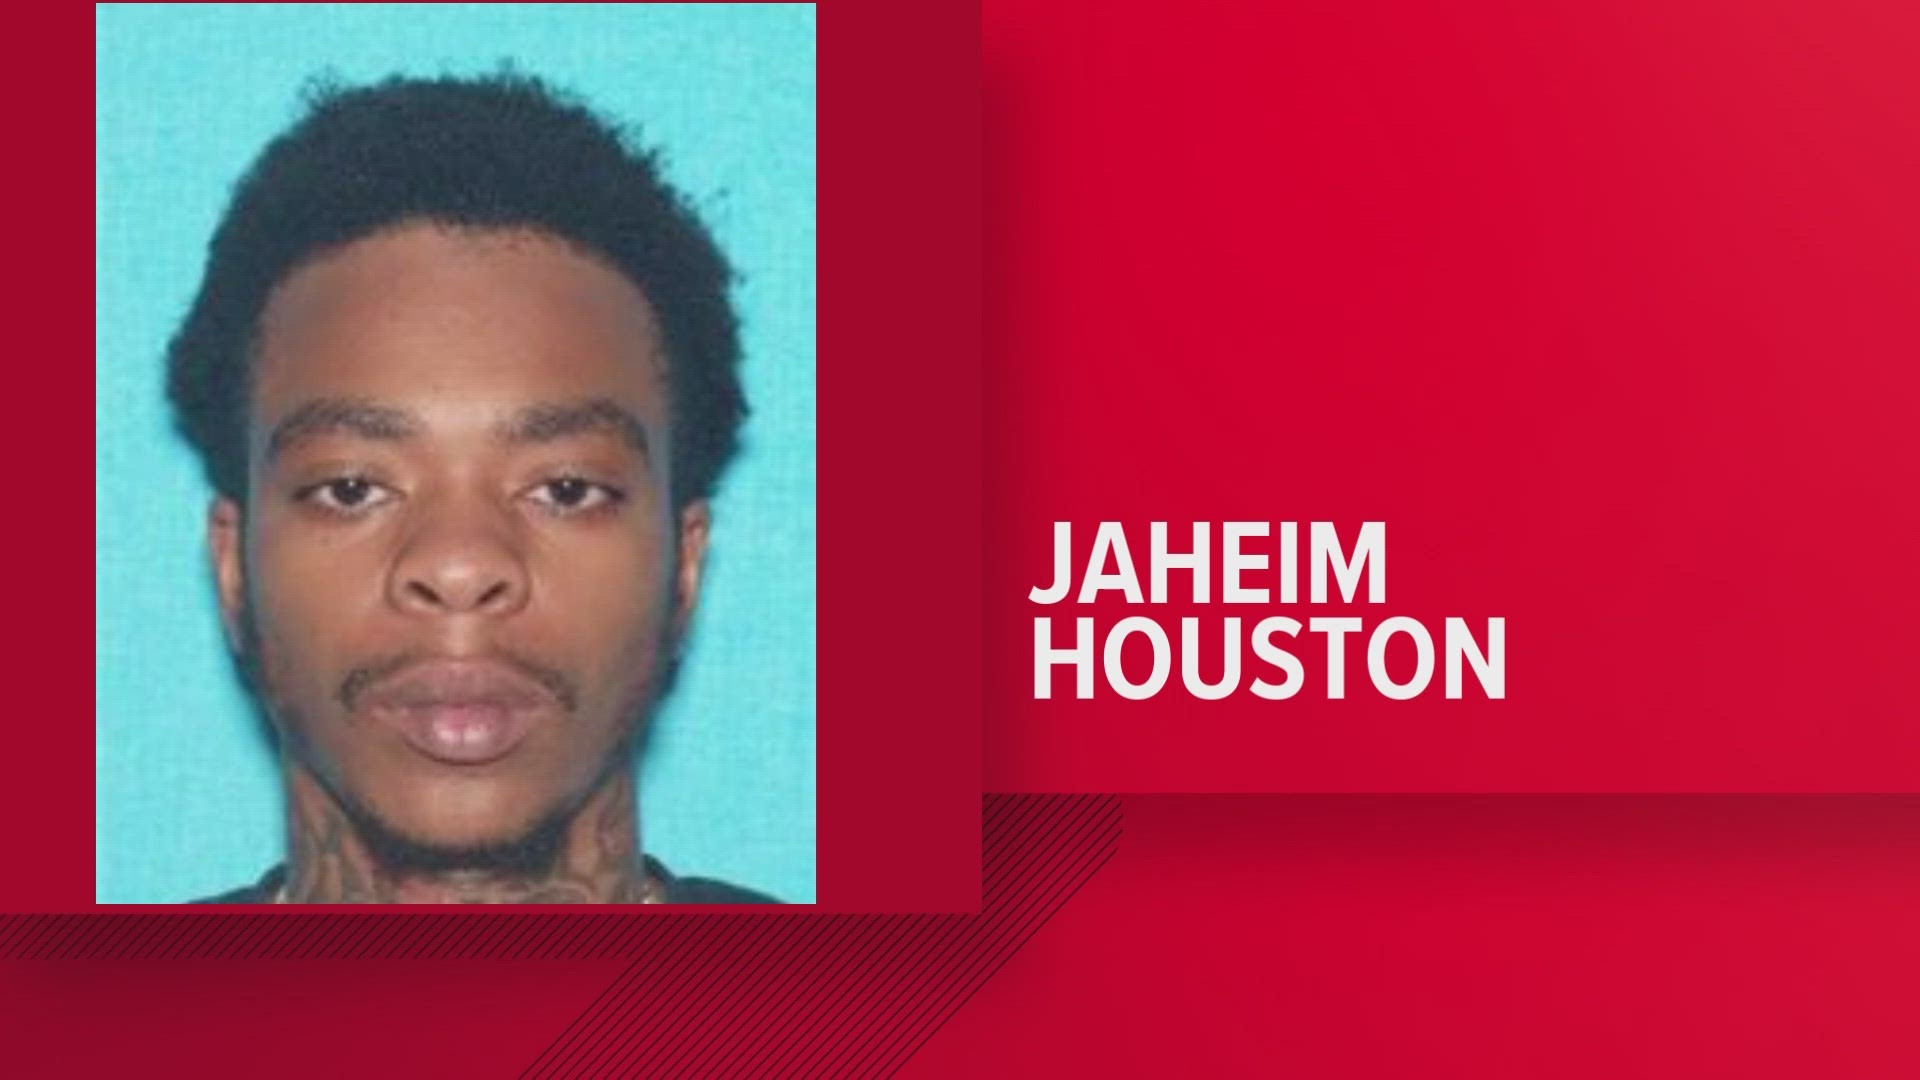 Jaheim Houston was wanted on two counts of attempted first-degree murder and other charges, stemming from a May shooting at Bebo's Cafe.